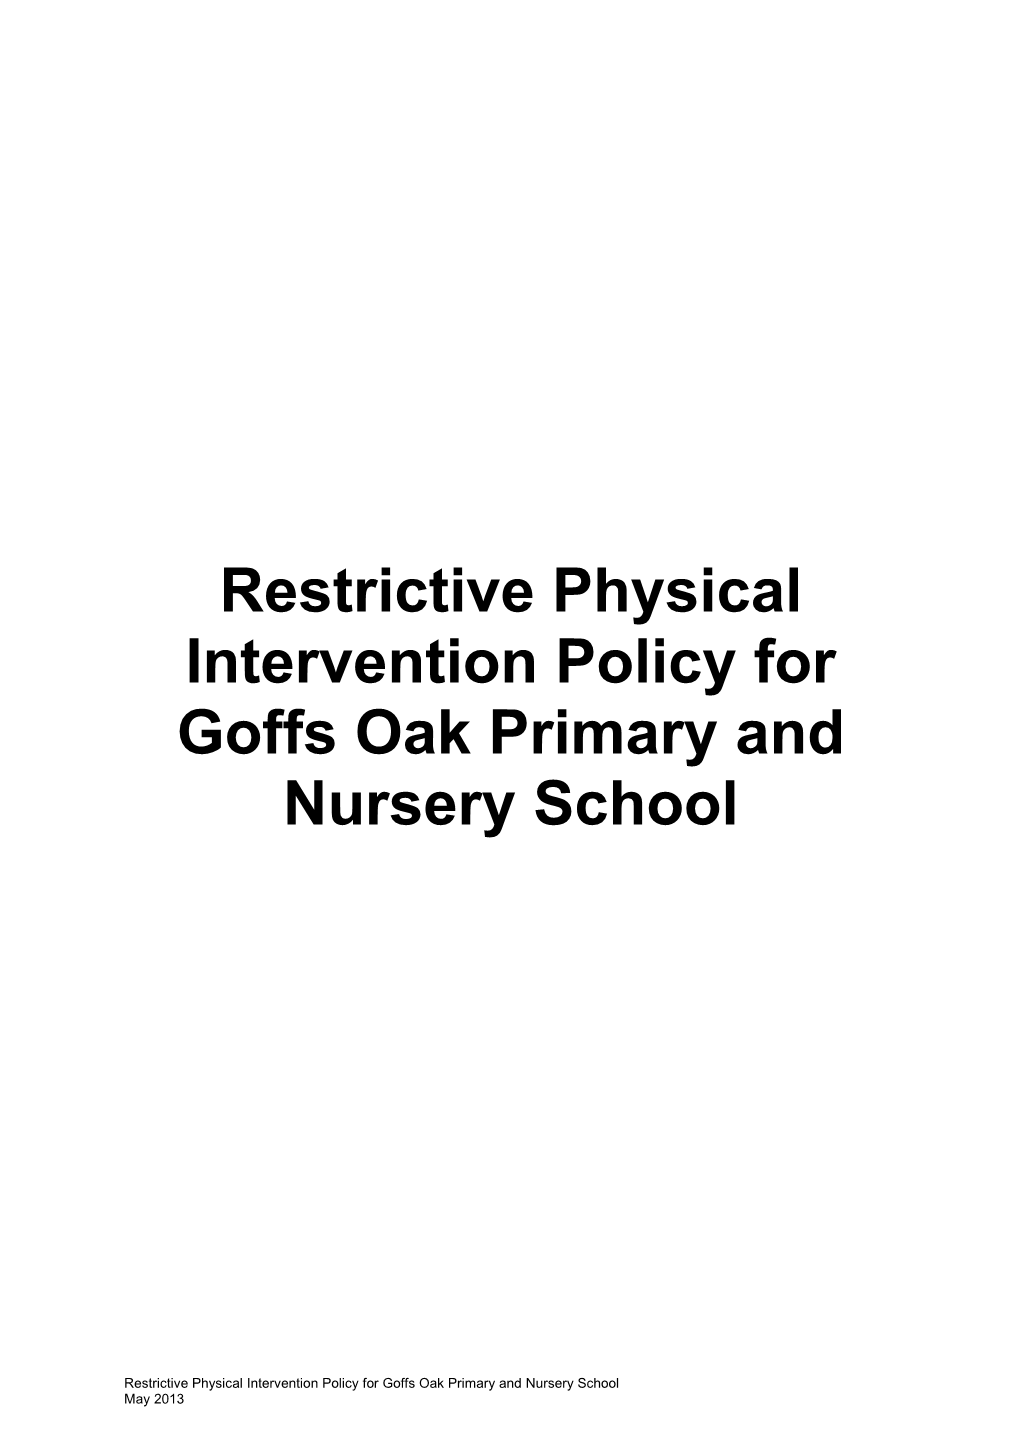 MODEL Restrictive Physical Intervention Policy for Schools